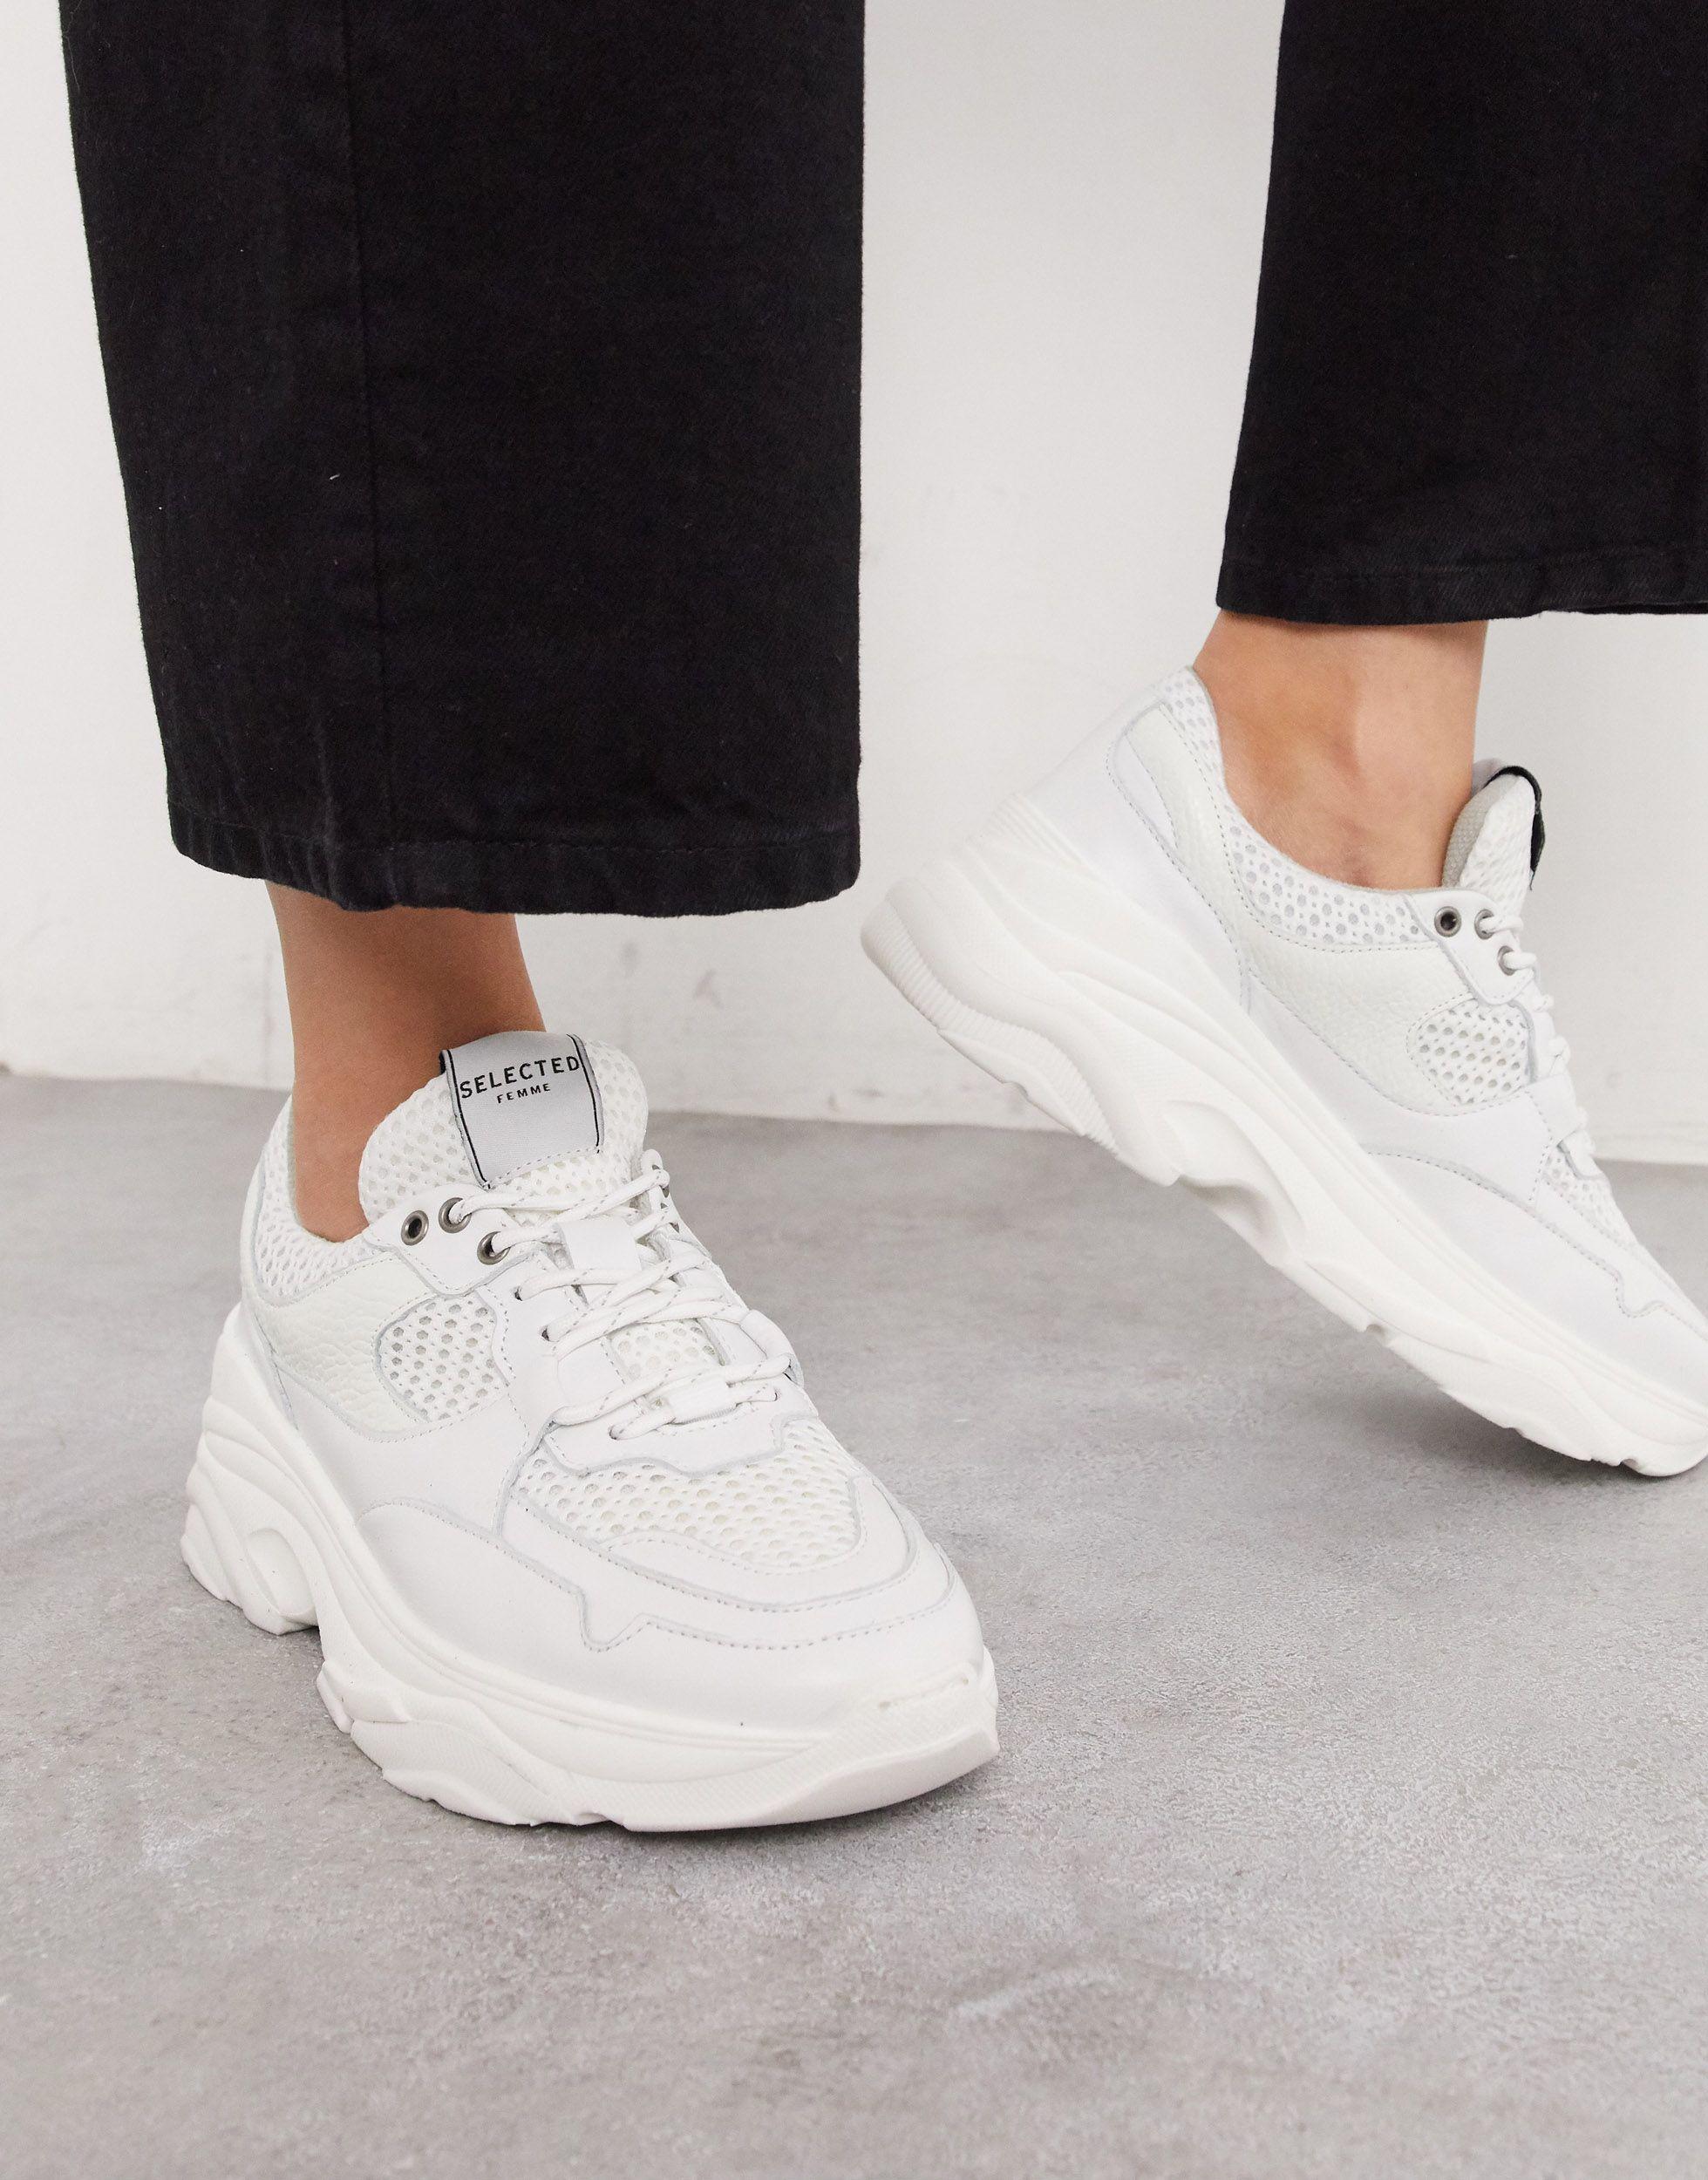 SELECTED Femme Chunky Leather Sneakers With Mesh in White - Lyst